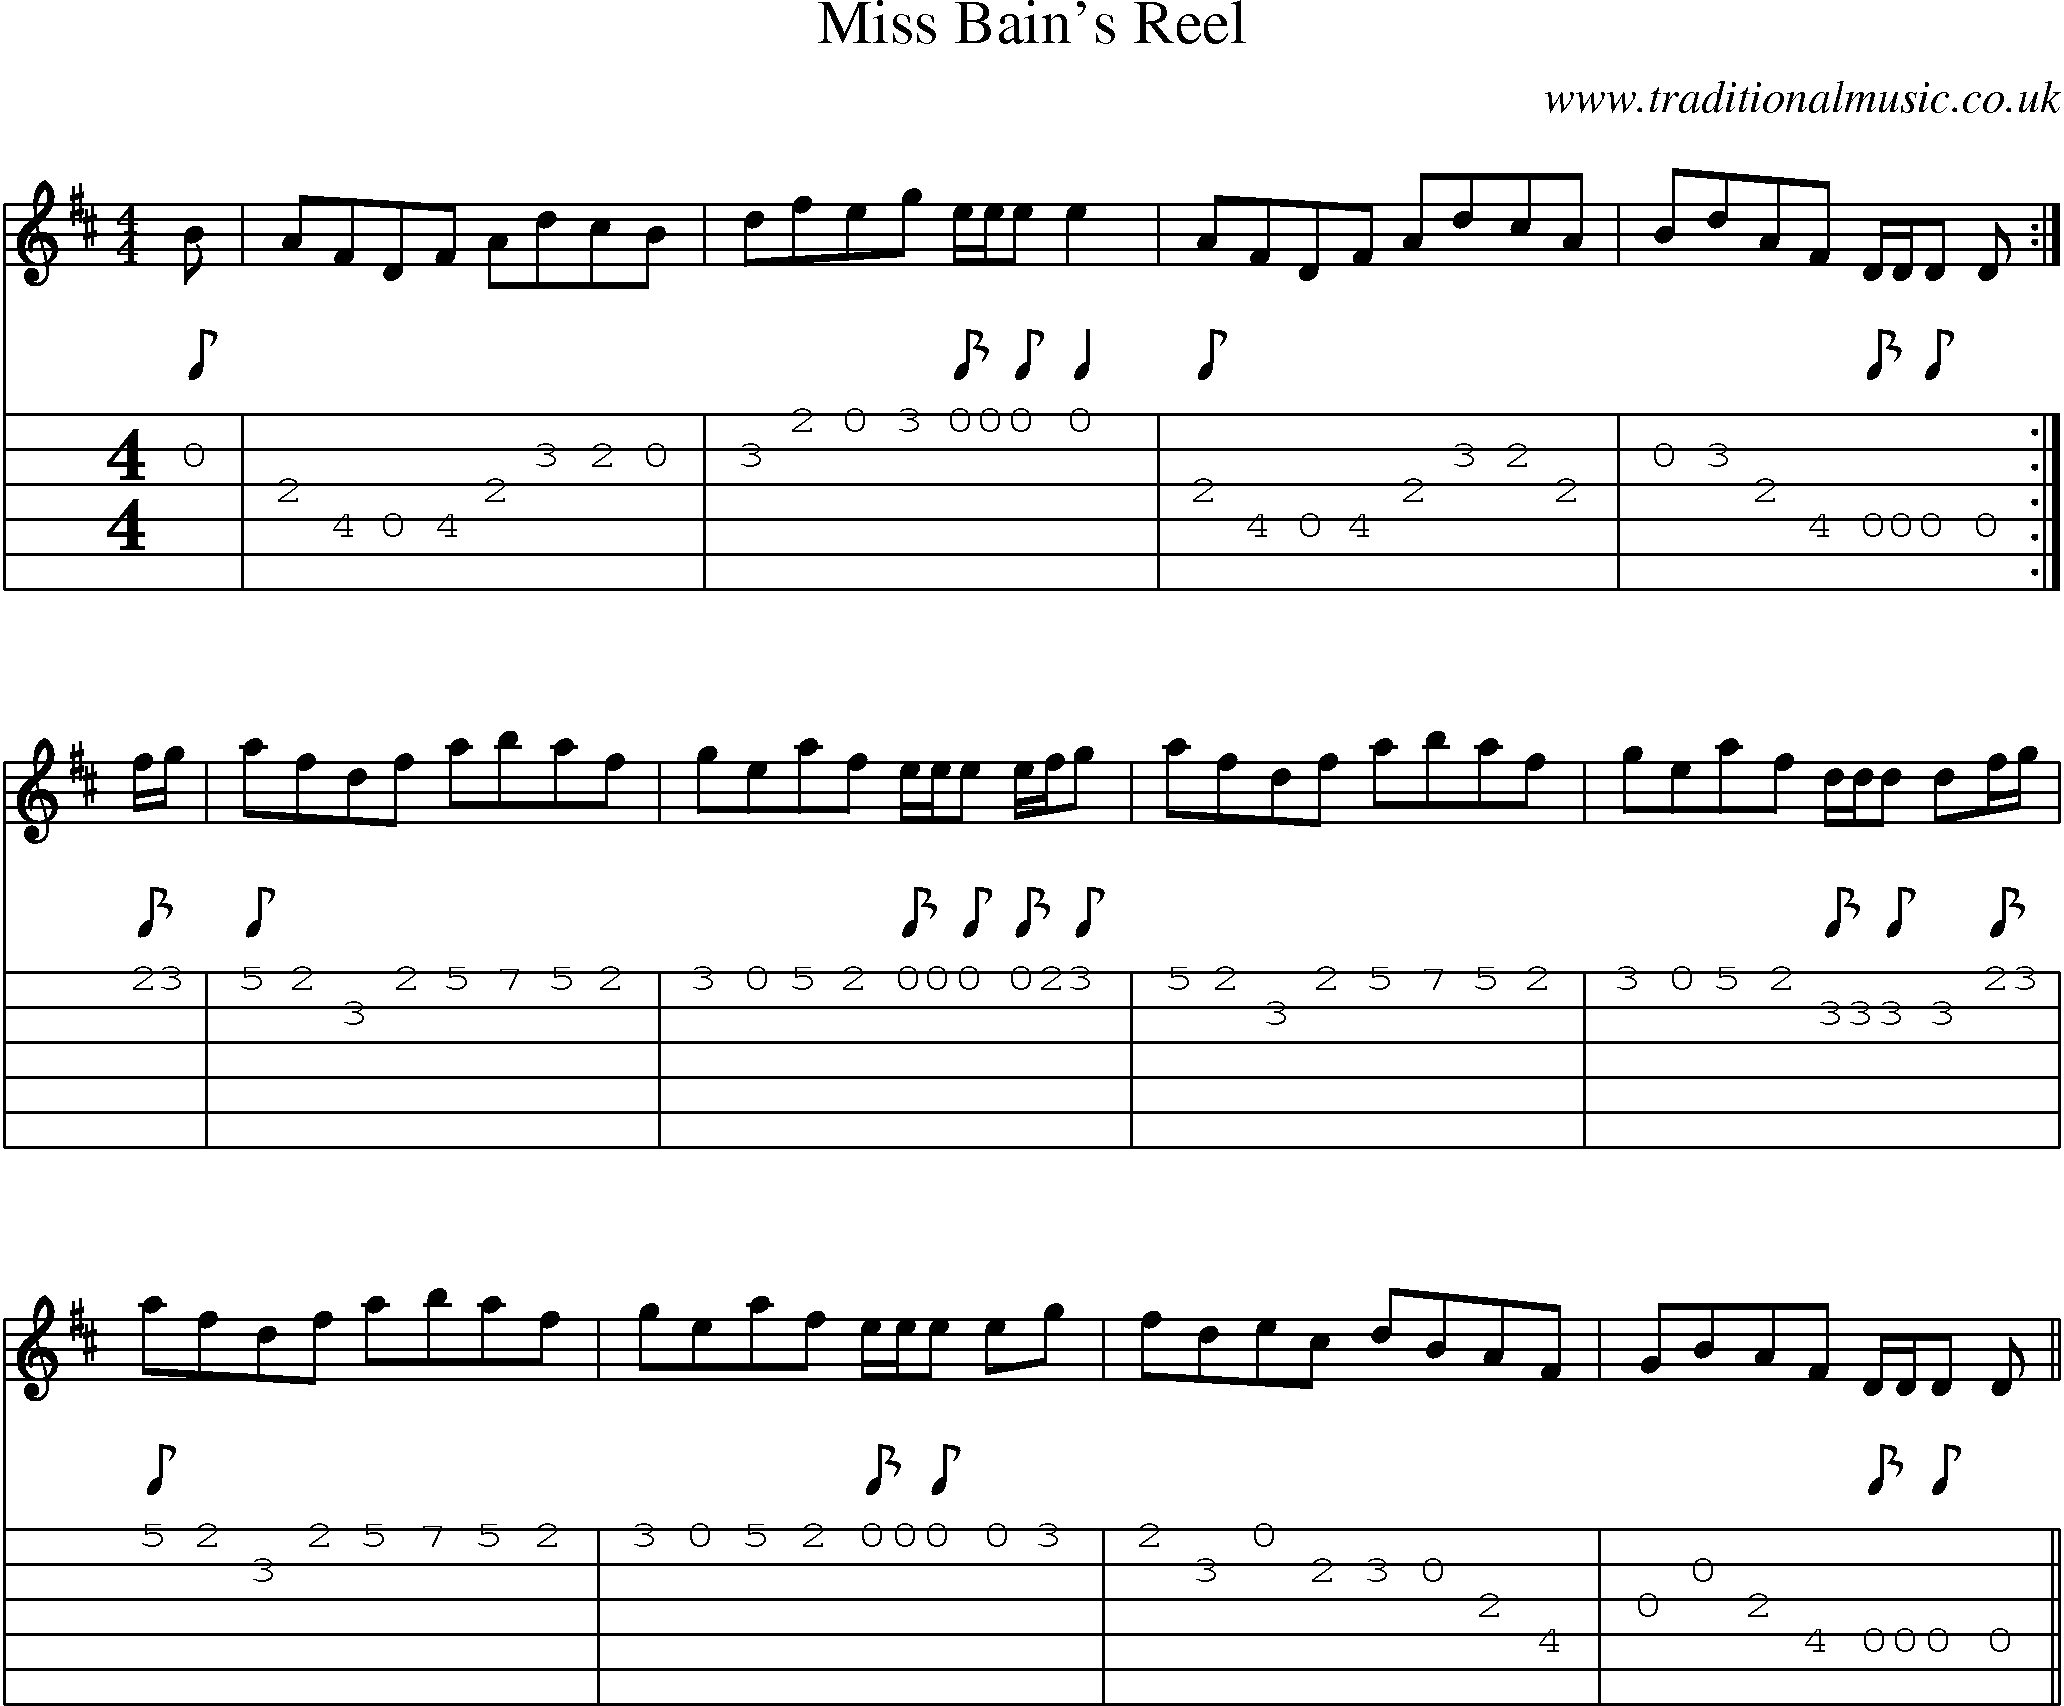 Music Score and Guitar Tabs for Miss Bains Reel